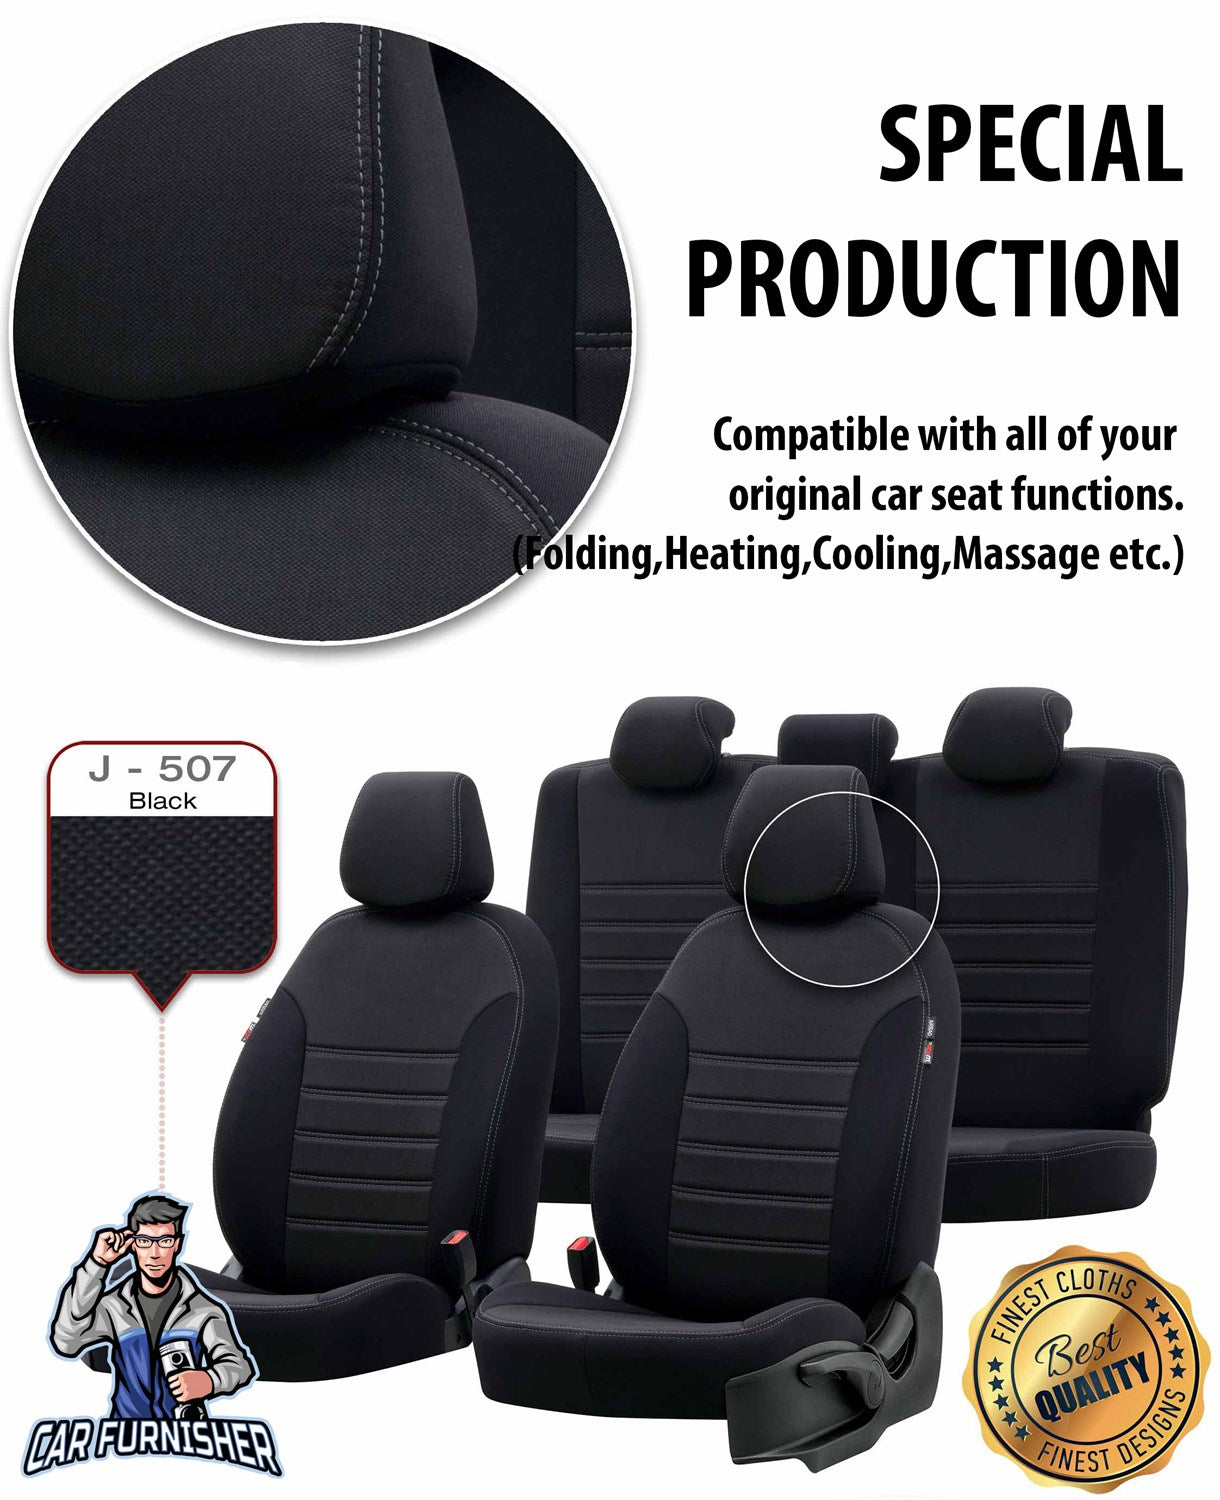 Kia XCeed 2019 - Onwards Custom Back Seat Cover - Over The Top